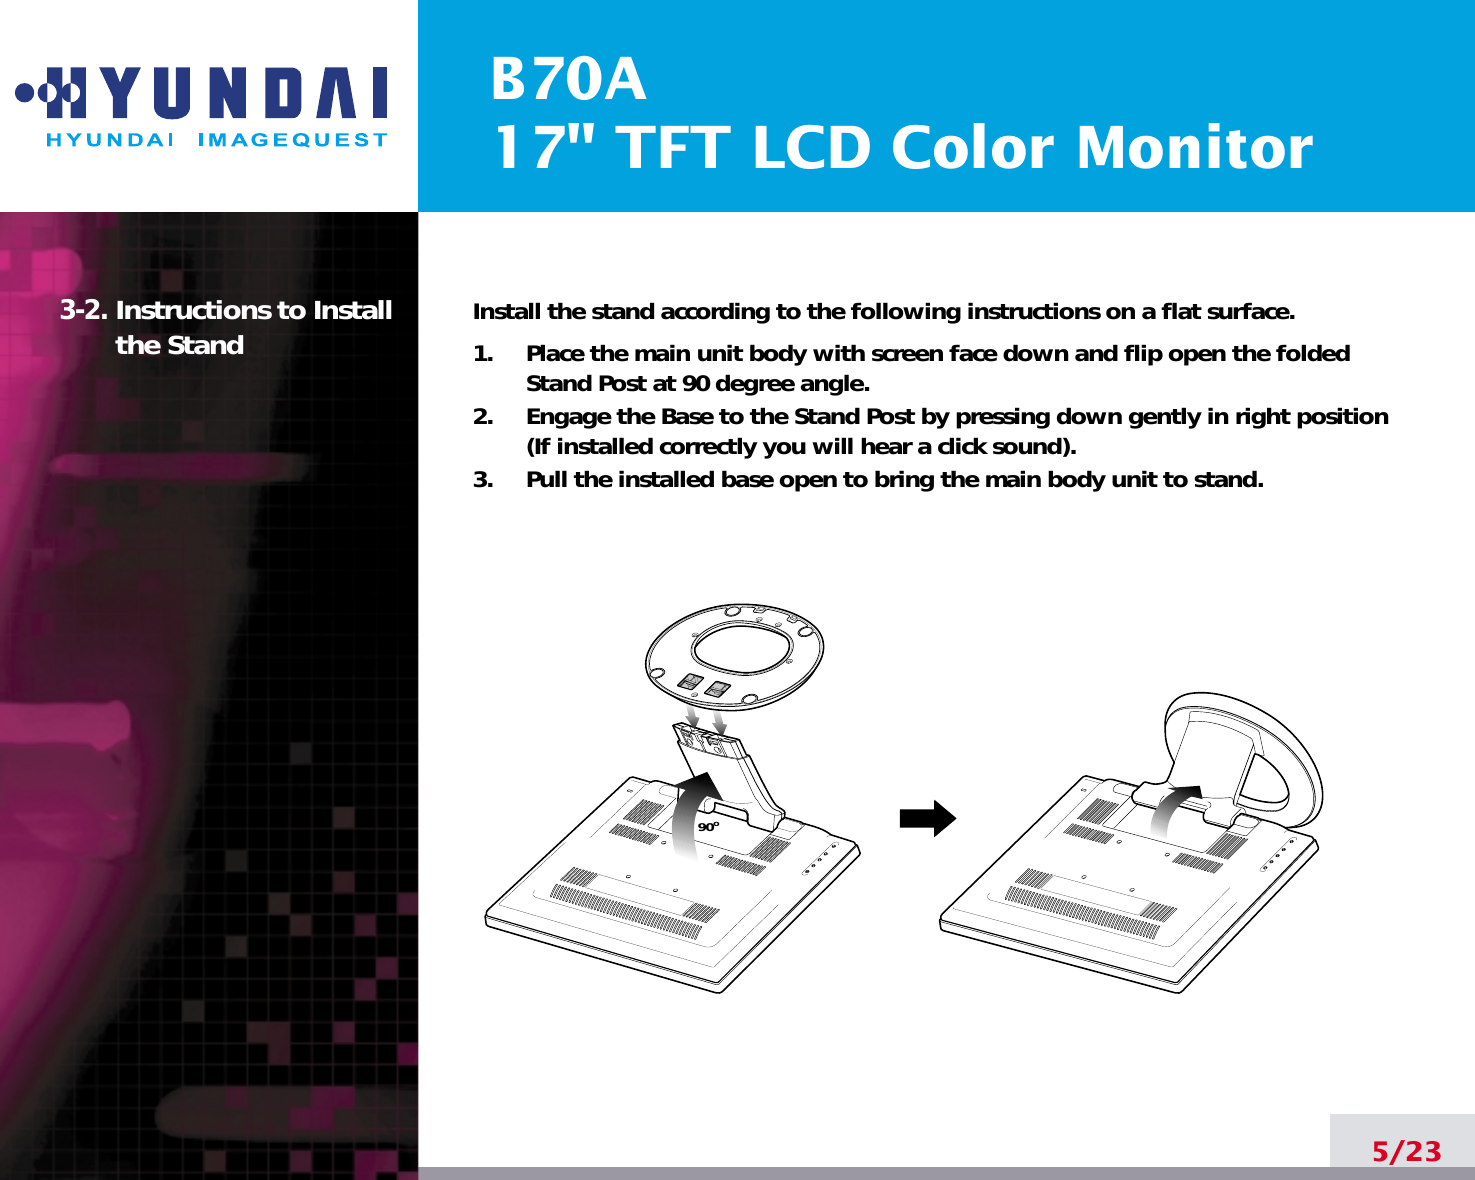 B70A17&quot; TFT LCD Color Monitor3-2. Instructions to Installthe Stand Install the stand according to the following instructions on a flat surface.1.     Place the main unit body with screen face down and flip open the foldedStand Post at 90 degree angle.2.     Engage the Base to the Stand Post by pressing down gently in right position(If installed correctly you will hear a click sound).3.     Pull the installed base open to bring the main body unit to stand.5/2390o